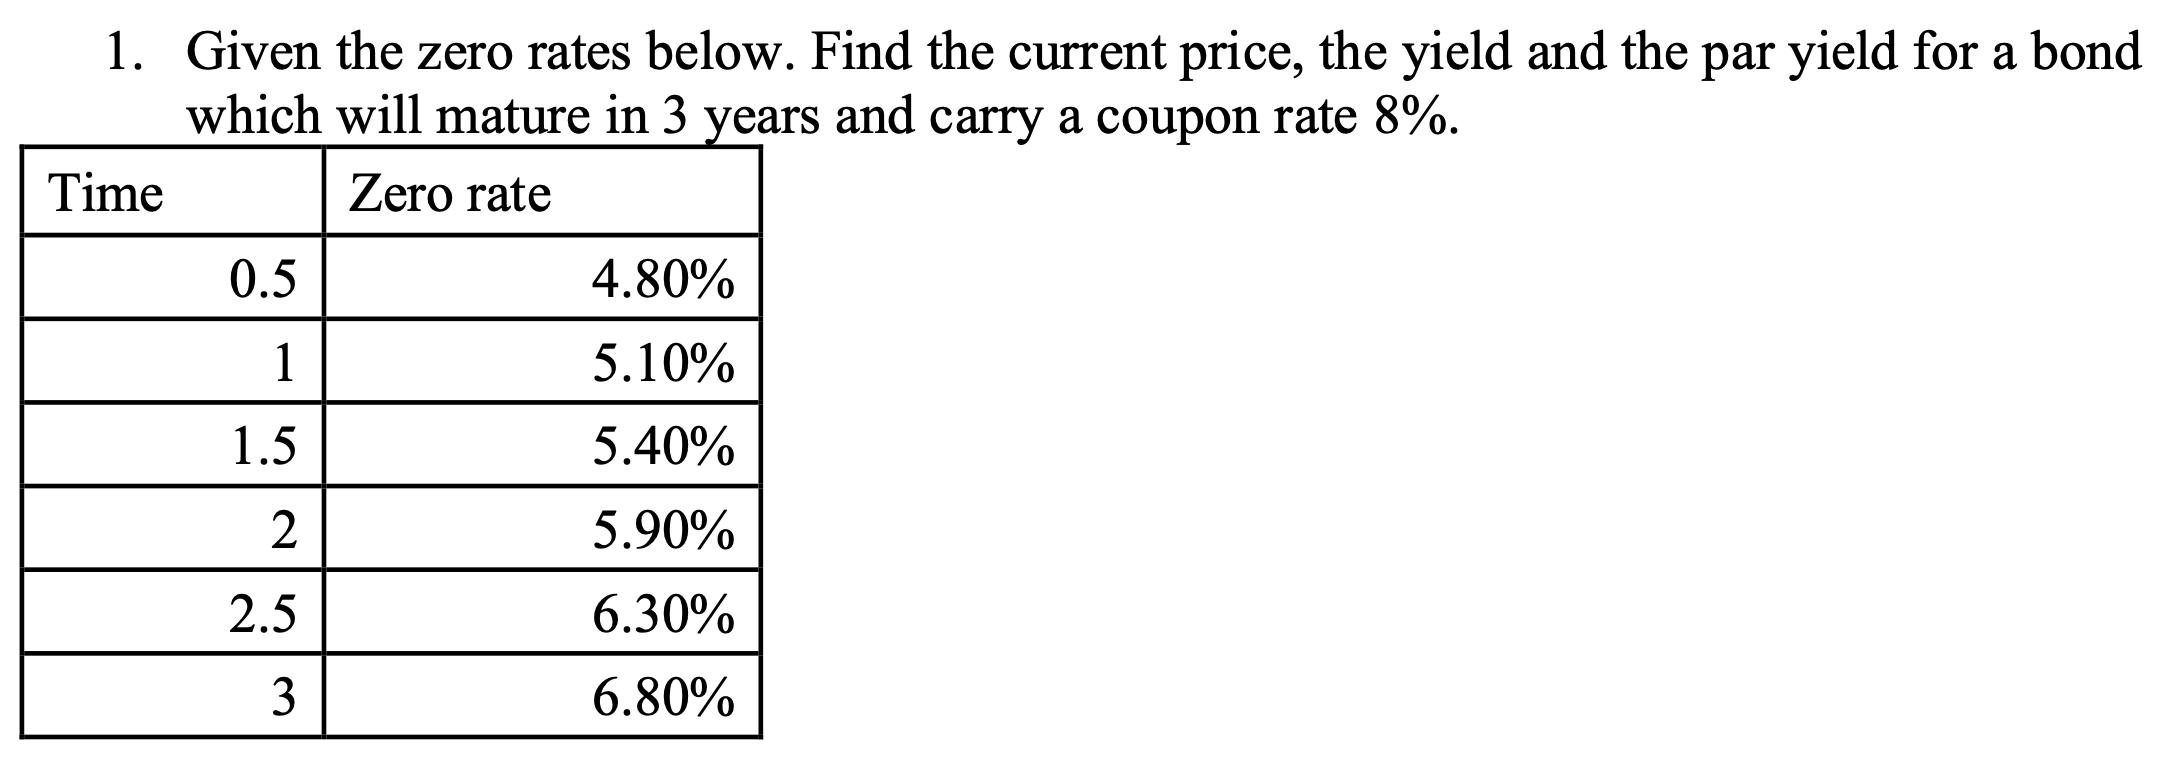 1. Given the zero rates below. Find the current price, the yield and the par yield for a bond which will mature in 3 years an